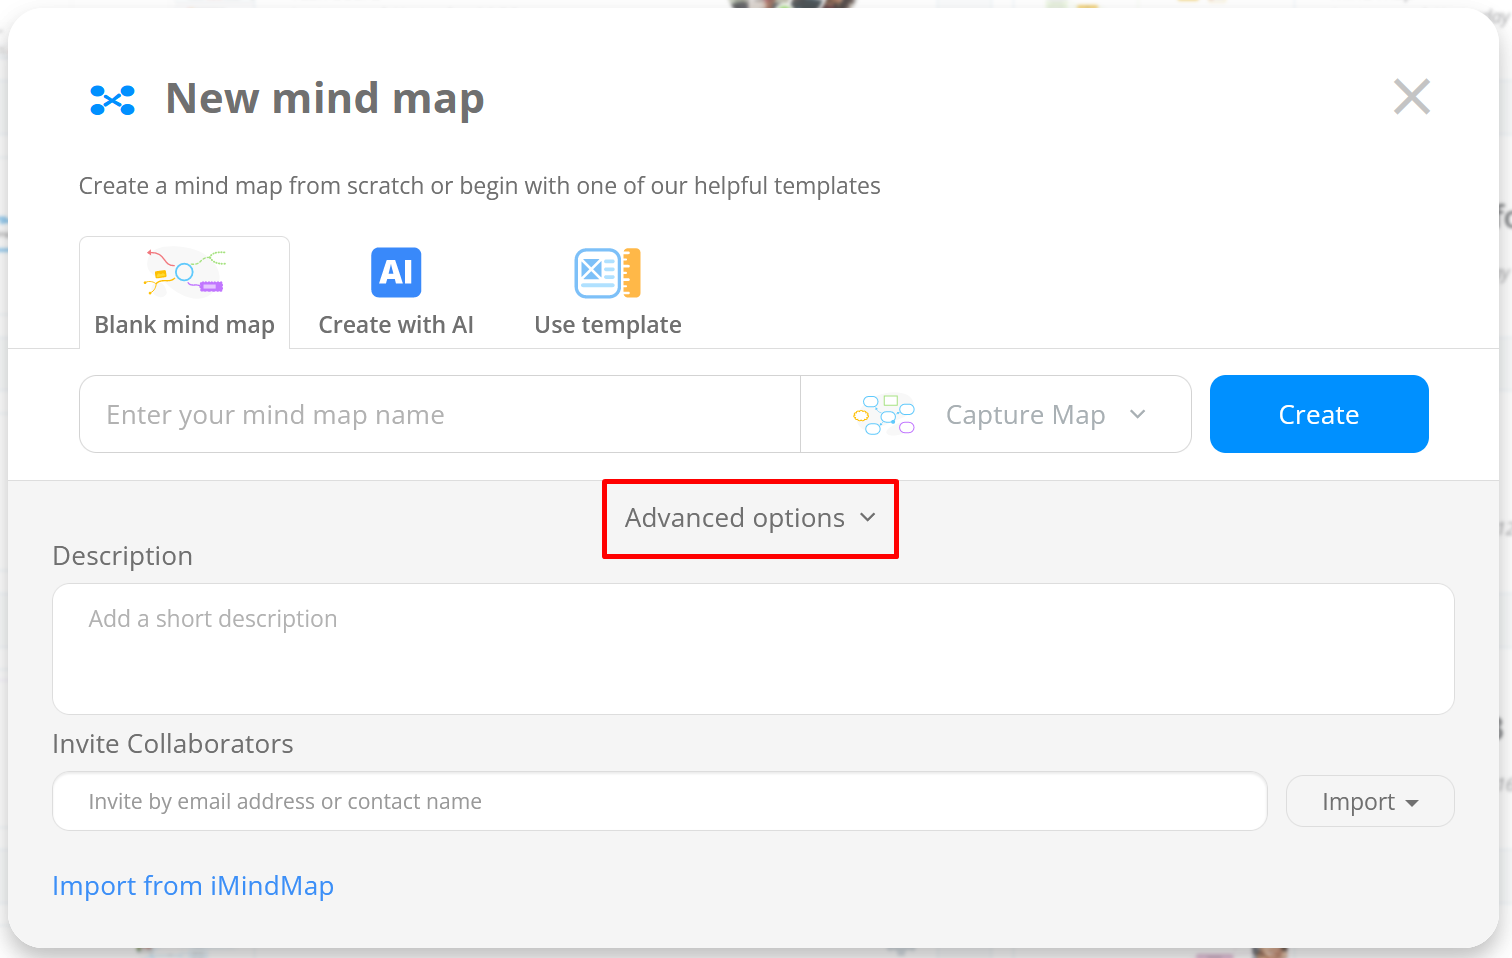 Name your Capture Map and in the Advanced Options, at the bottom of the window, you can add a map description and any people you wish to collaborate with. Once that is done, click Create.